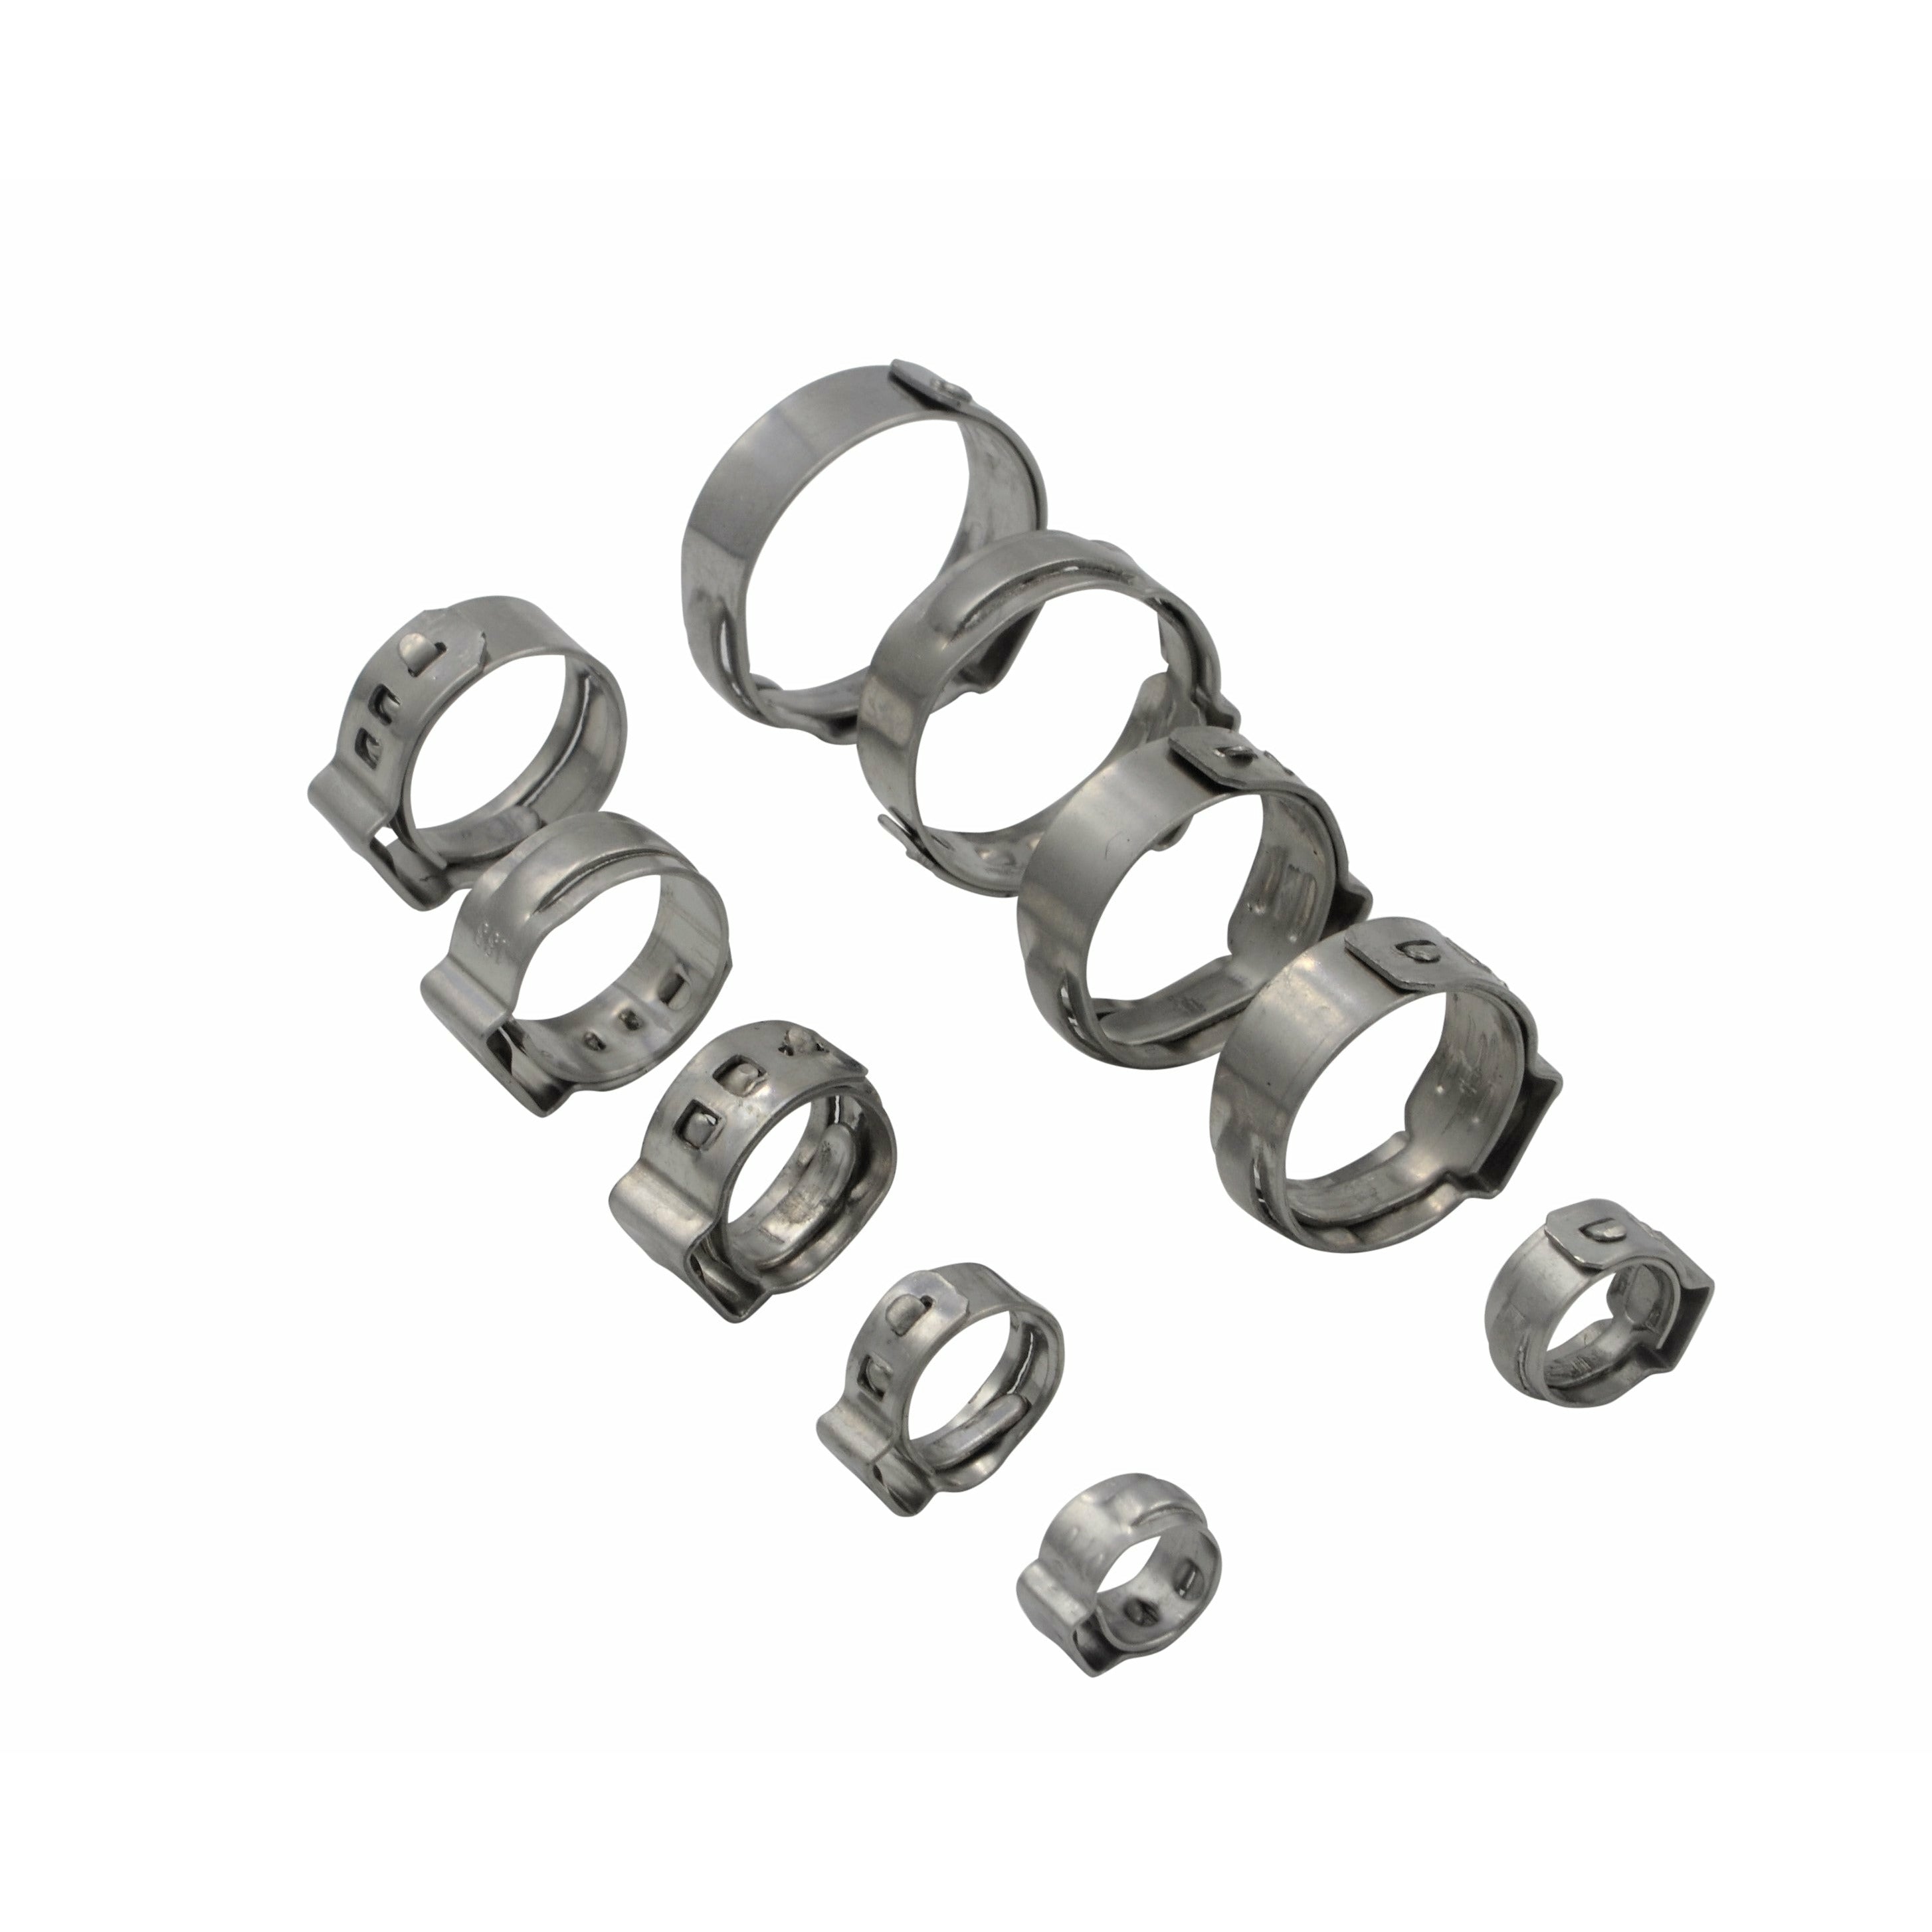 100 Piece 304 Stainless Steel 8.8-10.5mm Ear Hose Clamp Grab Kit Assortment